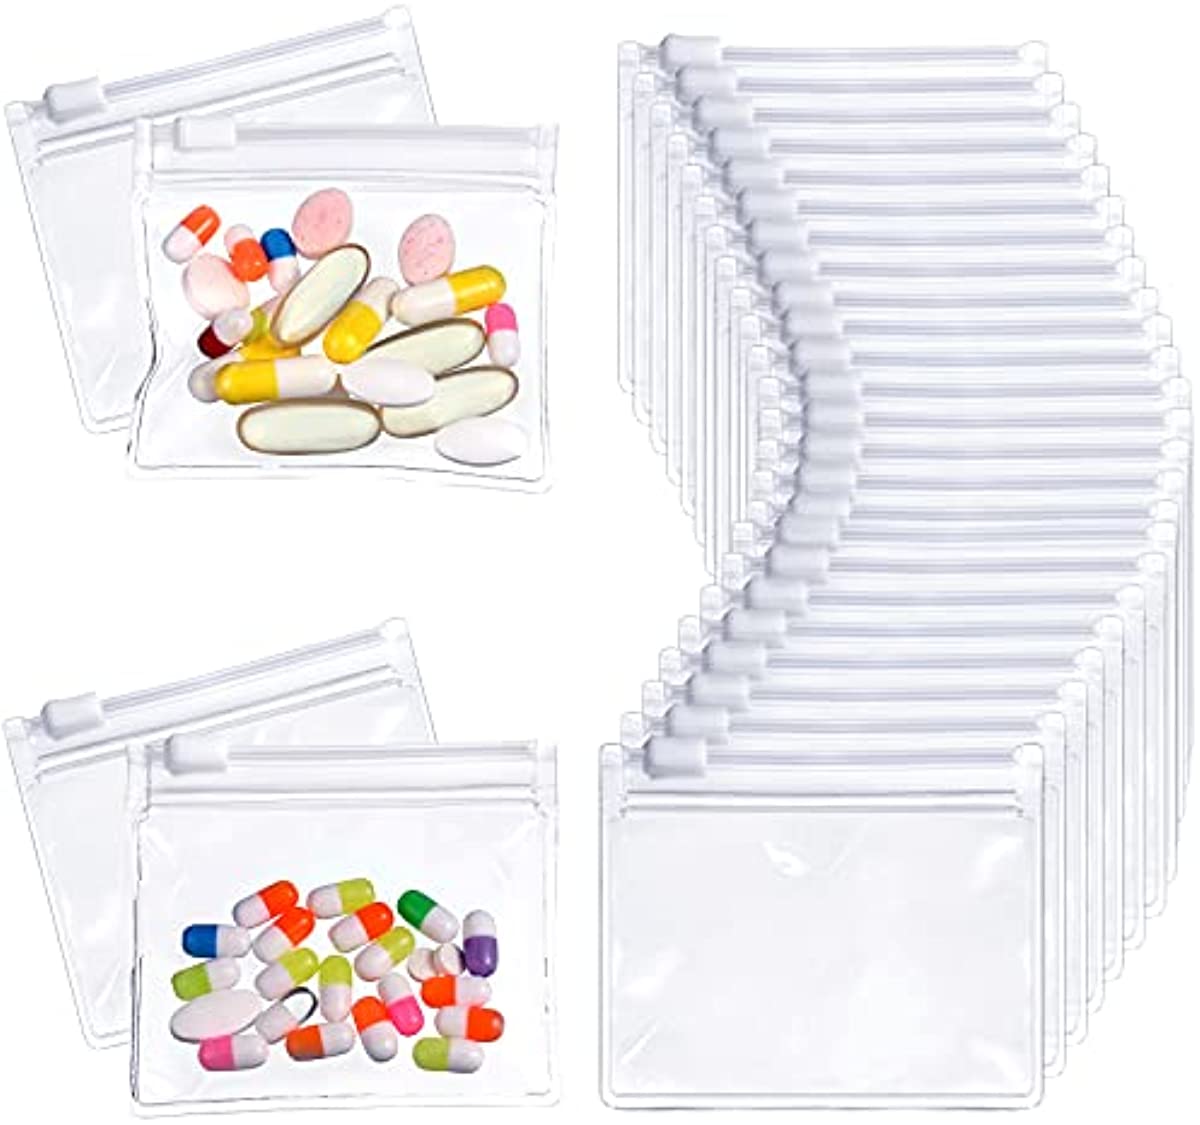 Pill Pouch Bags Zippered Pill Pouch Set Reusable Pill Baggies Clear Plastic Pill Bags Self Sealing Travel Medicine Organizer Storage Pouches with Slide Lock for Pills and Small Items(96 Pieces)